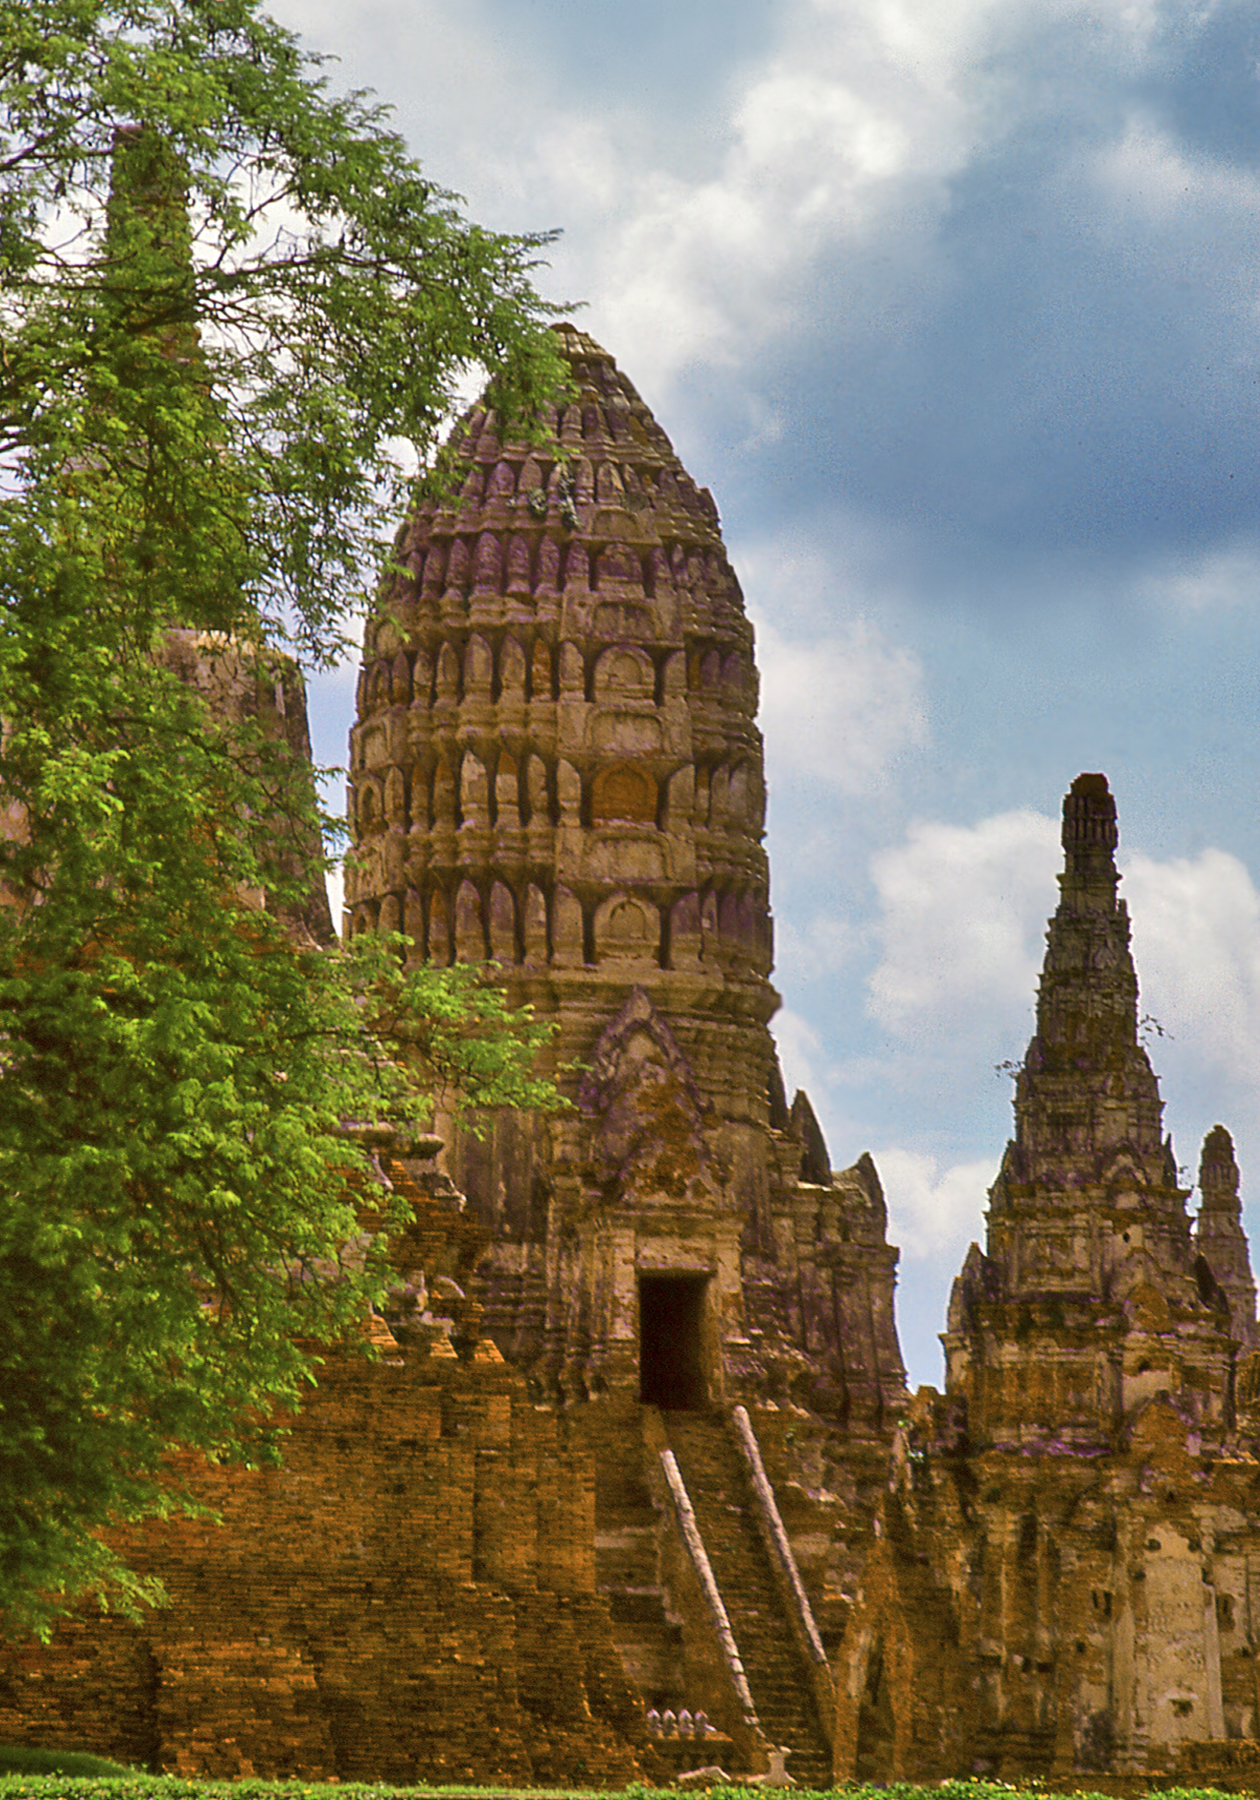 Architecture of Southeast Asia | STONES OF HISTORY